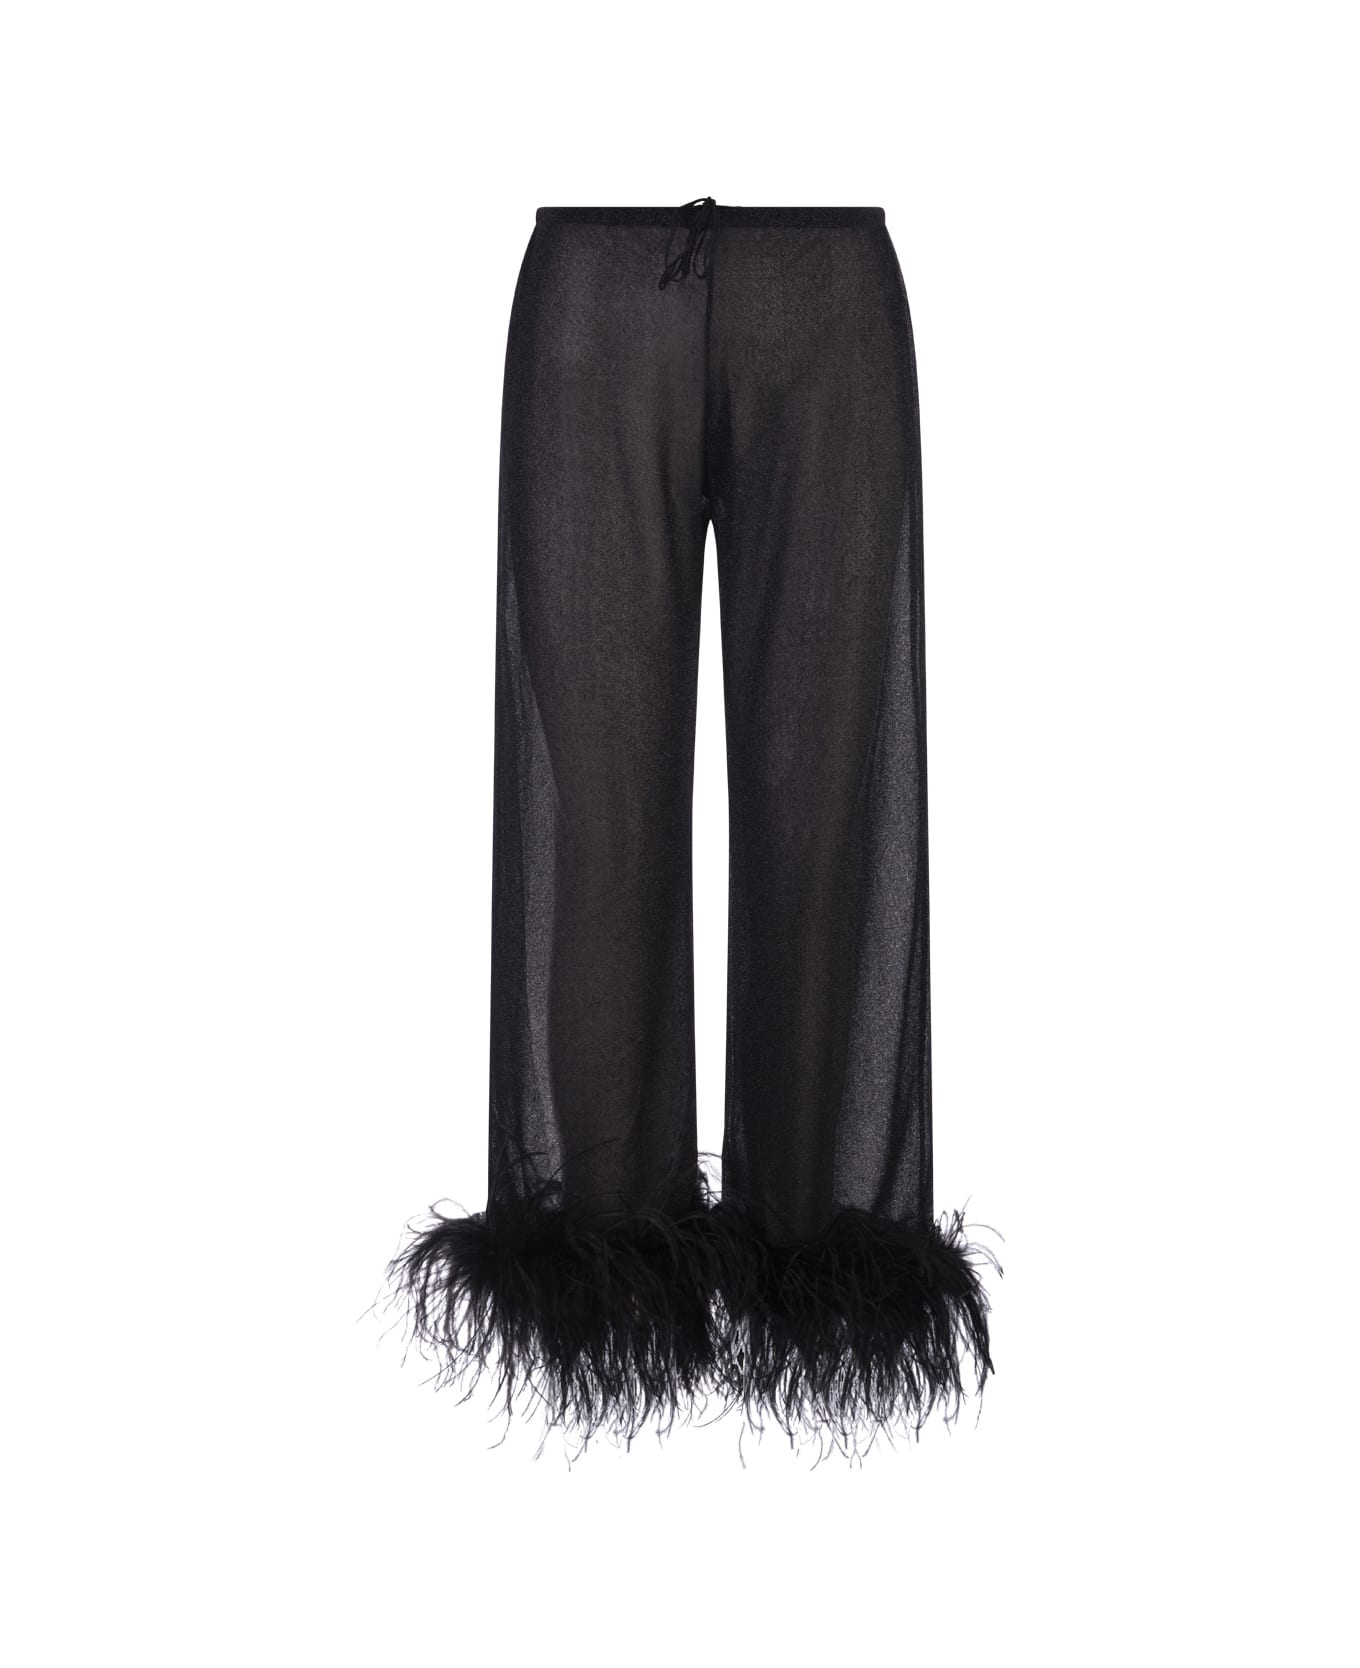 Oseree Black Lumiere Plumage Trousers - Black ボトムス